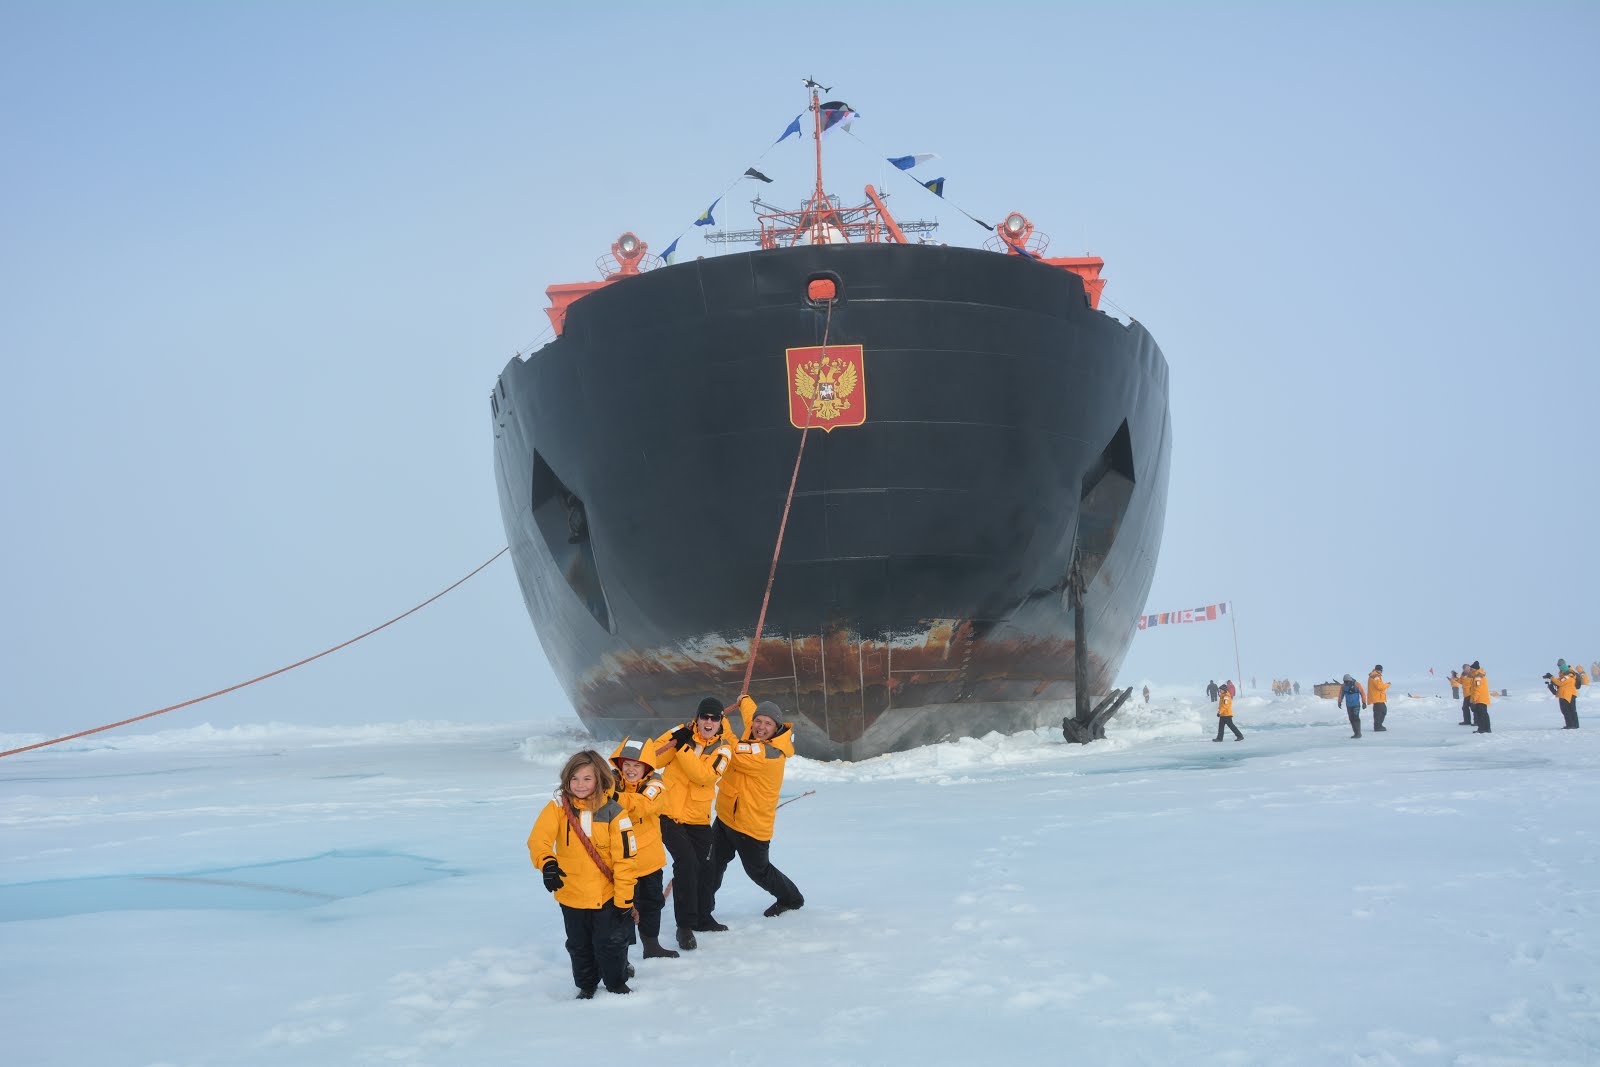 Pulling the ship to the North Pole